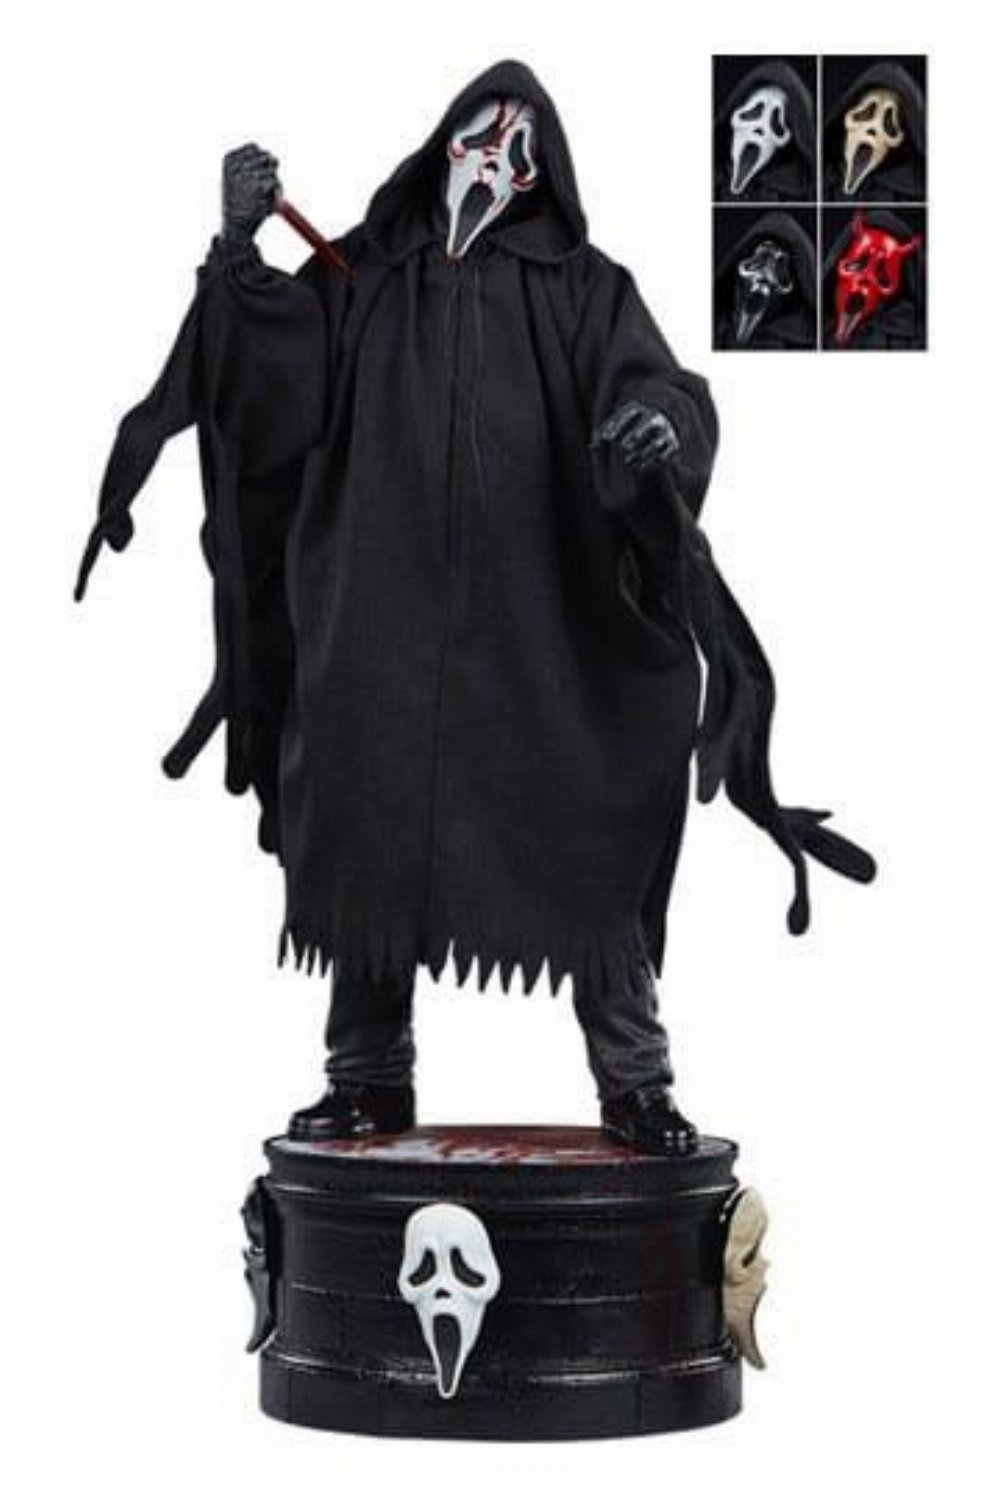 NYCC: The Ghost Face Youtooz Figures Will Make You Scream - The